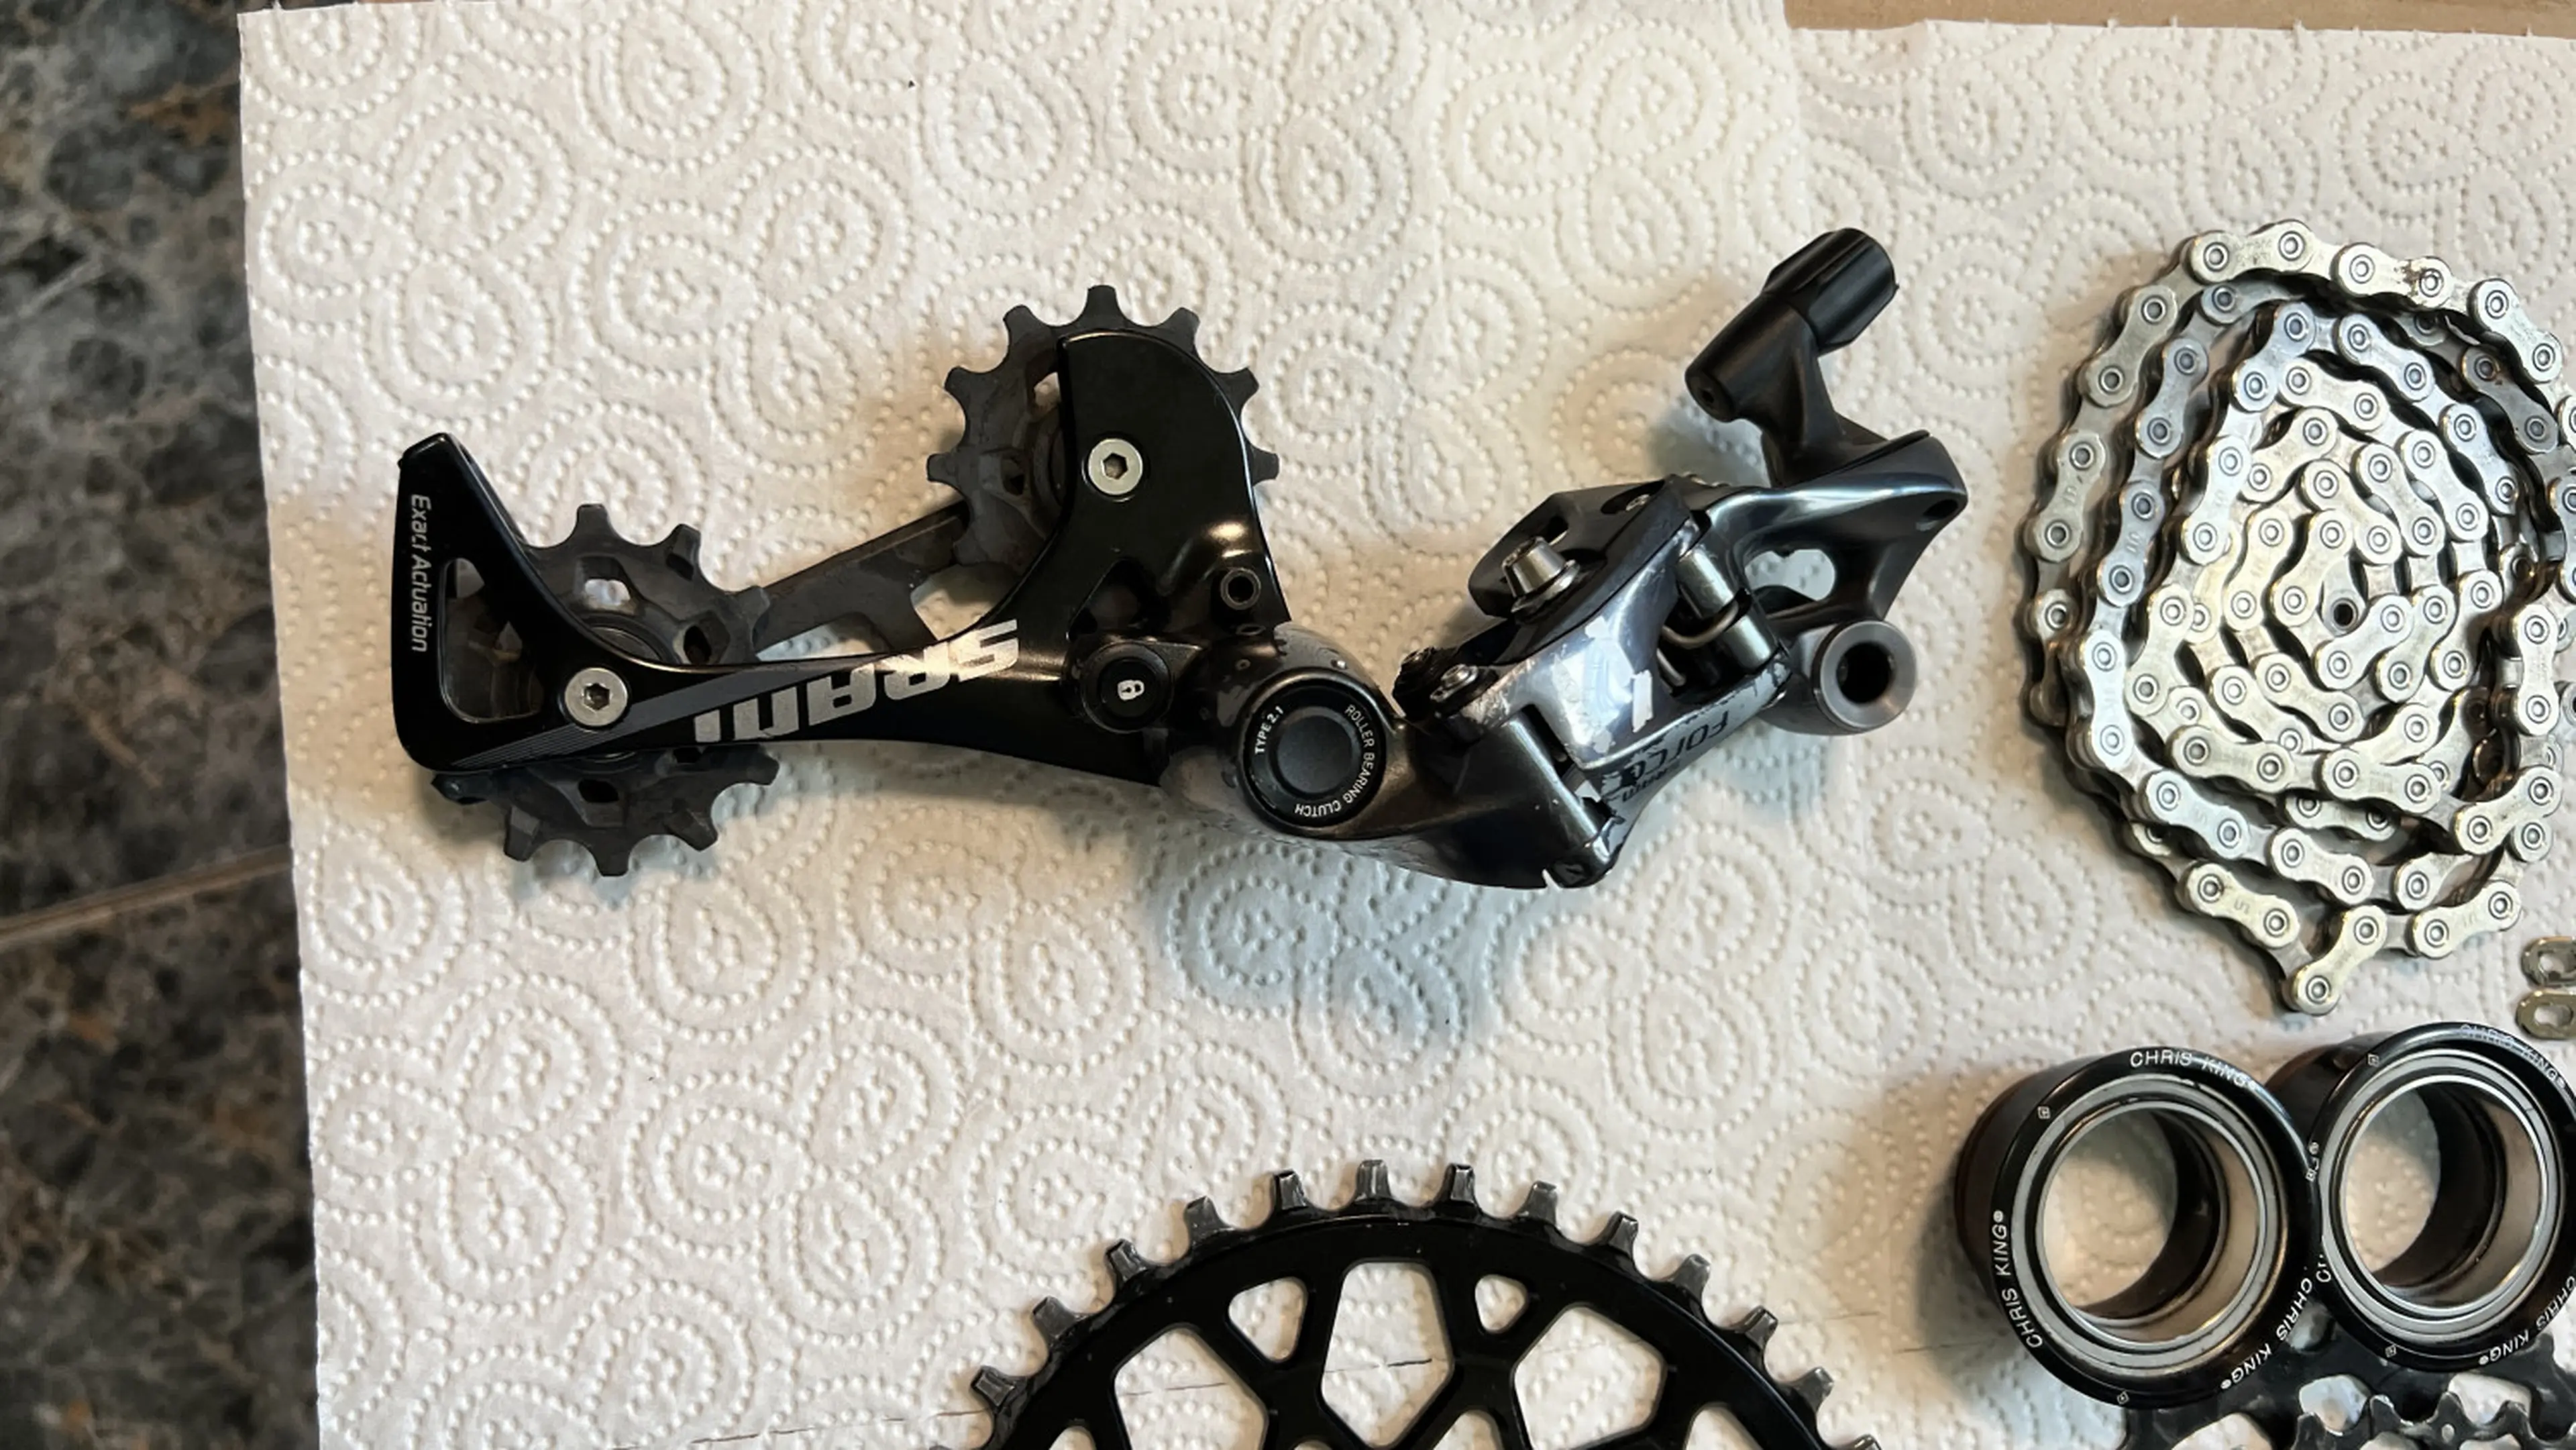 5. Groupset complet Sram Force CX1 1x11